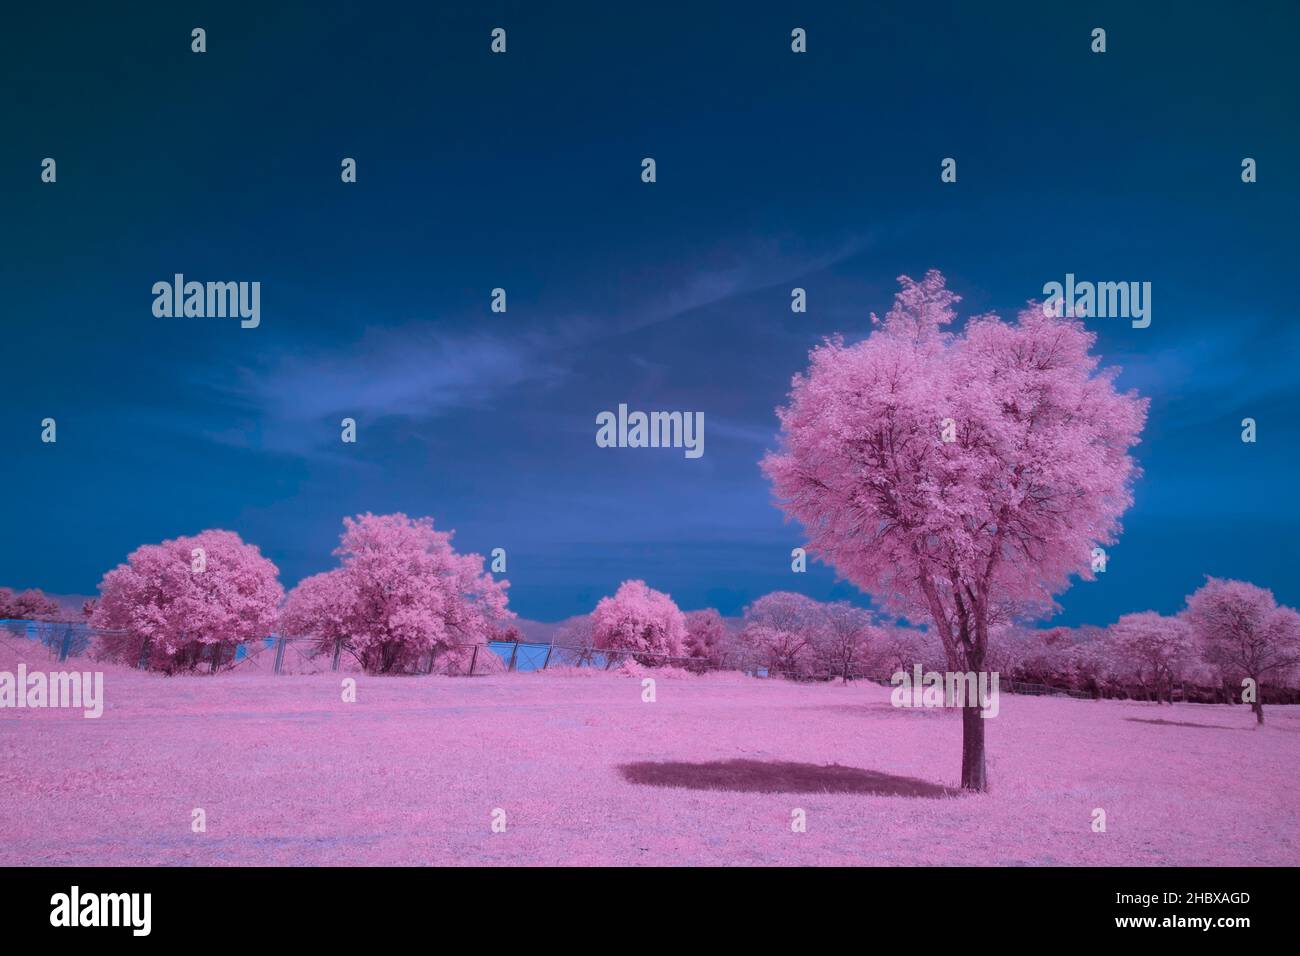 Surreal infrared landscape photo with a dramatic cloudy sky Stock Photo